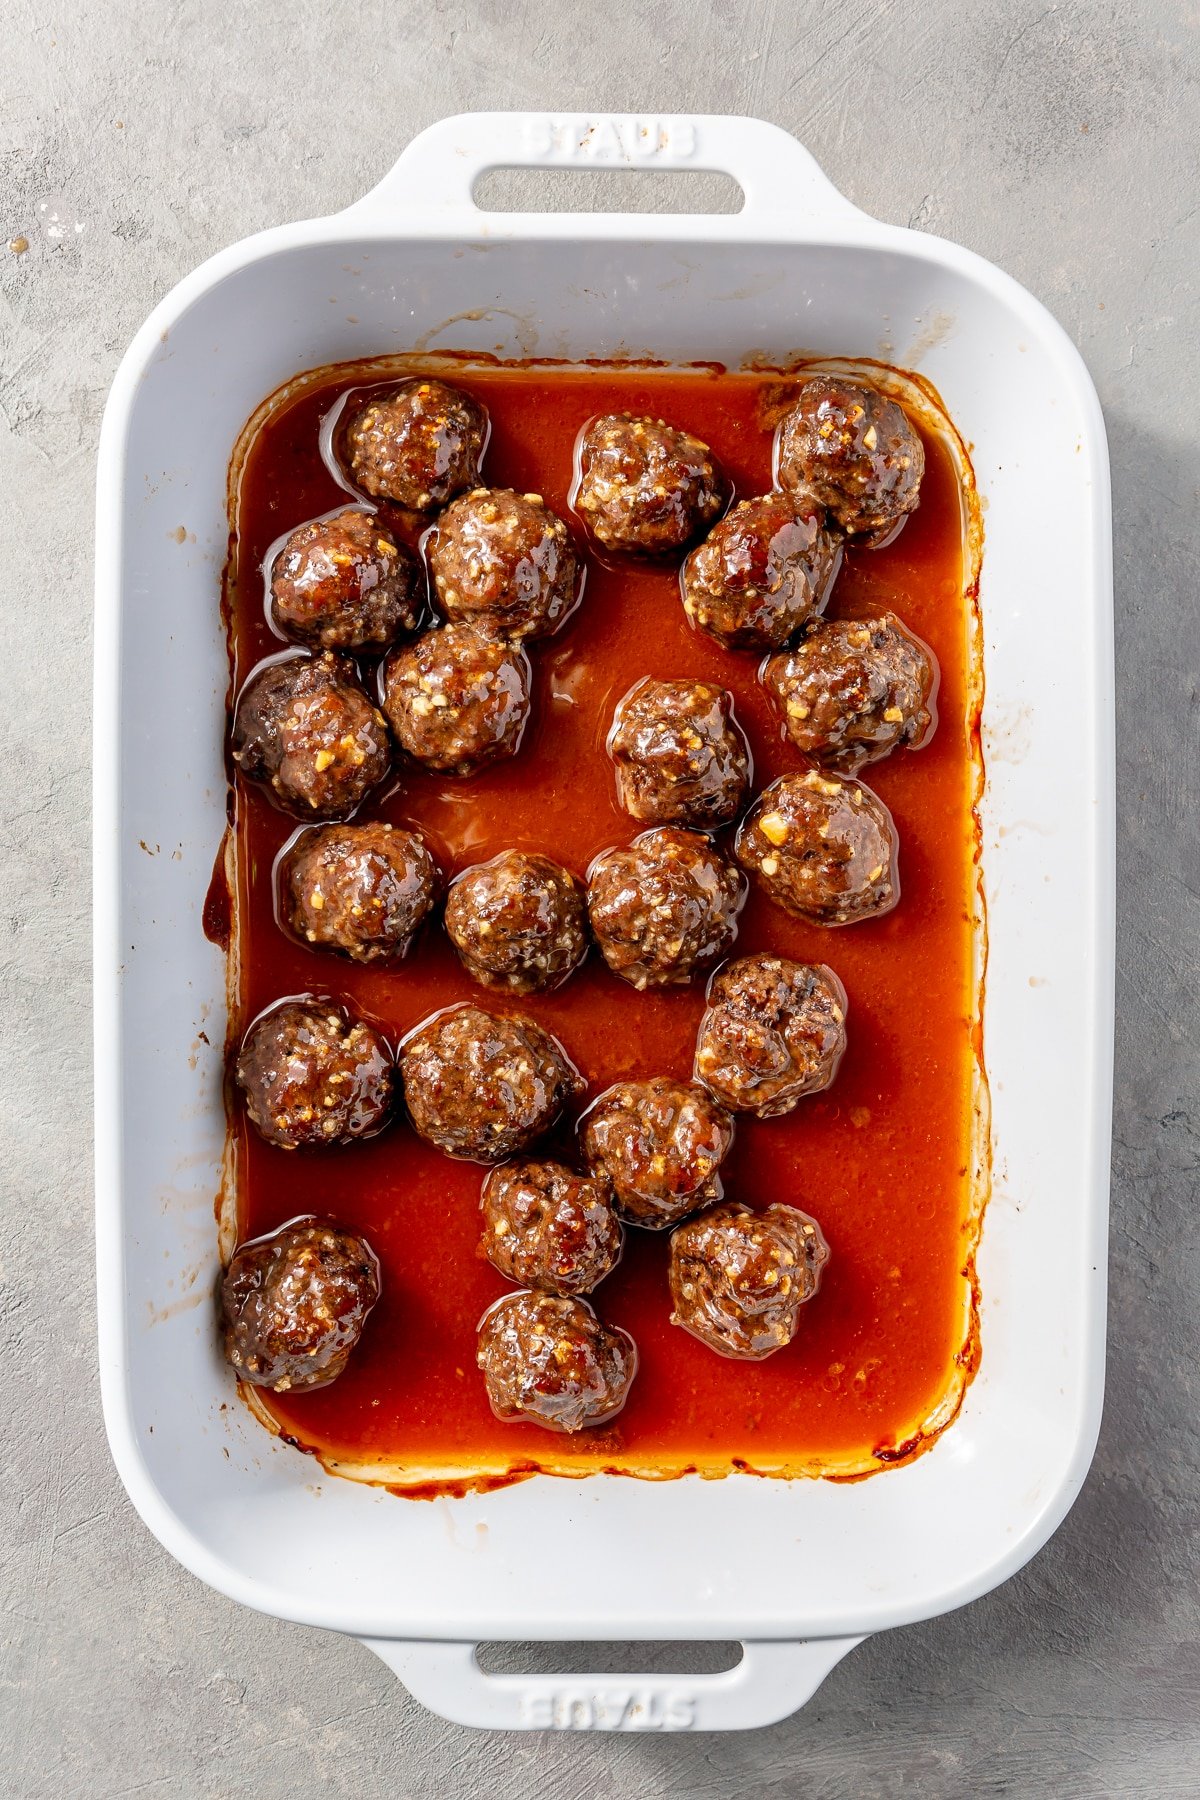 Fully baked meatballs sit in a white baking dish.